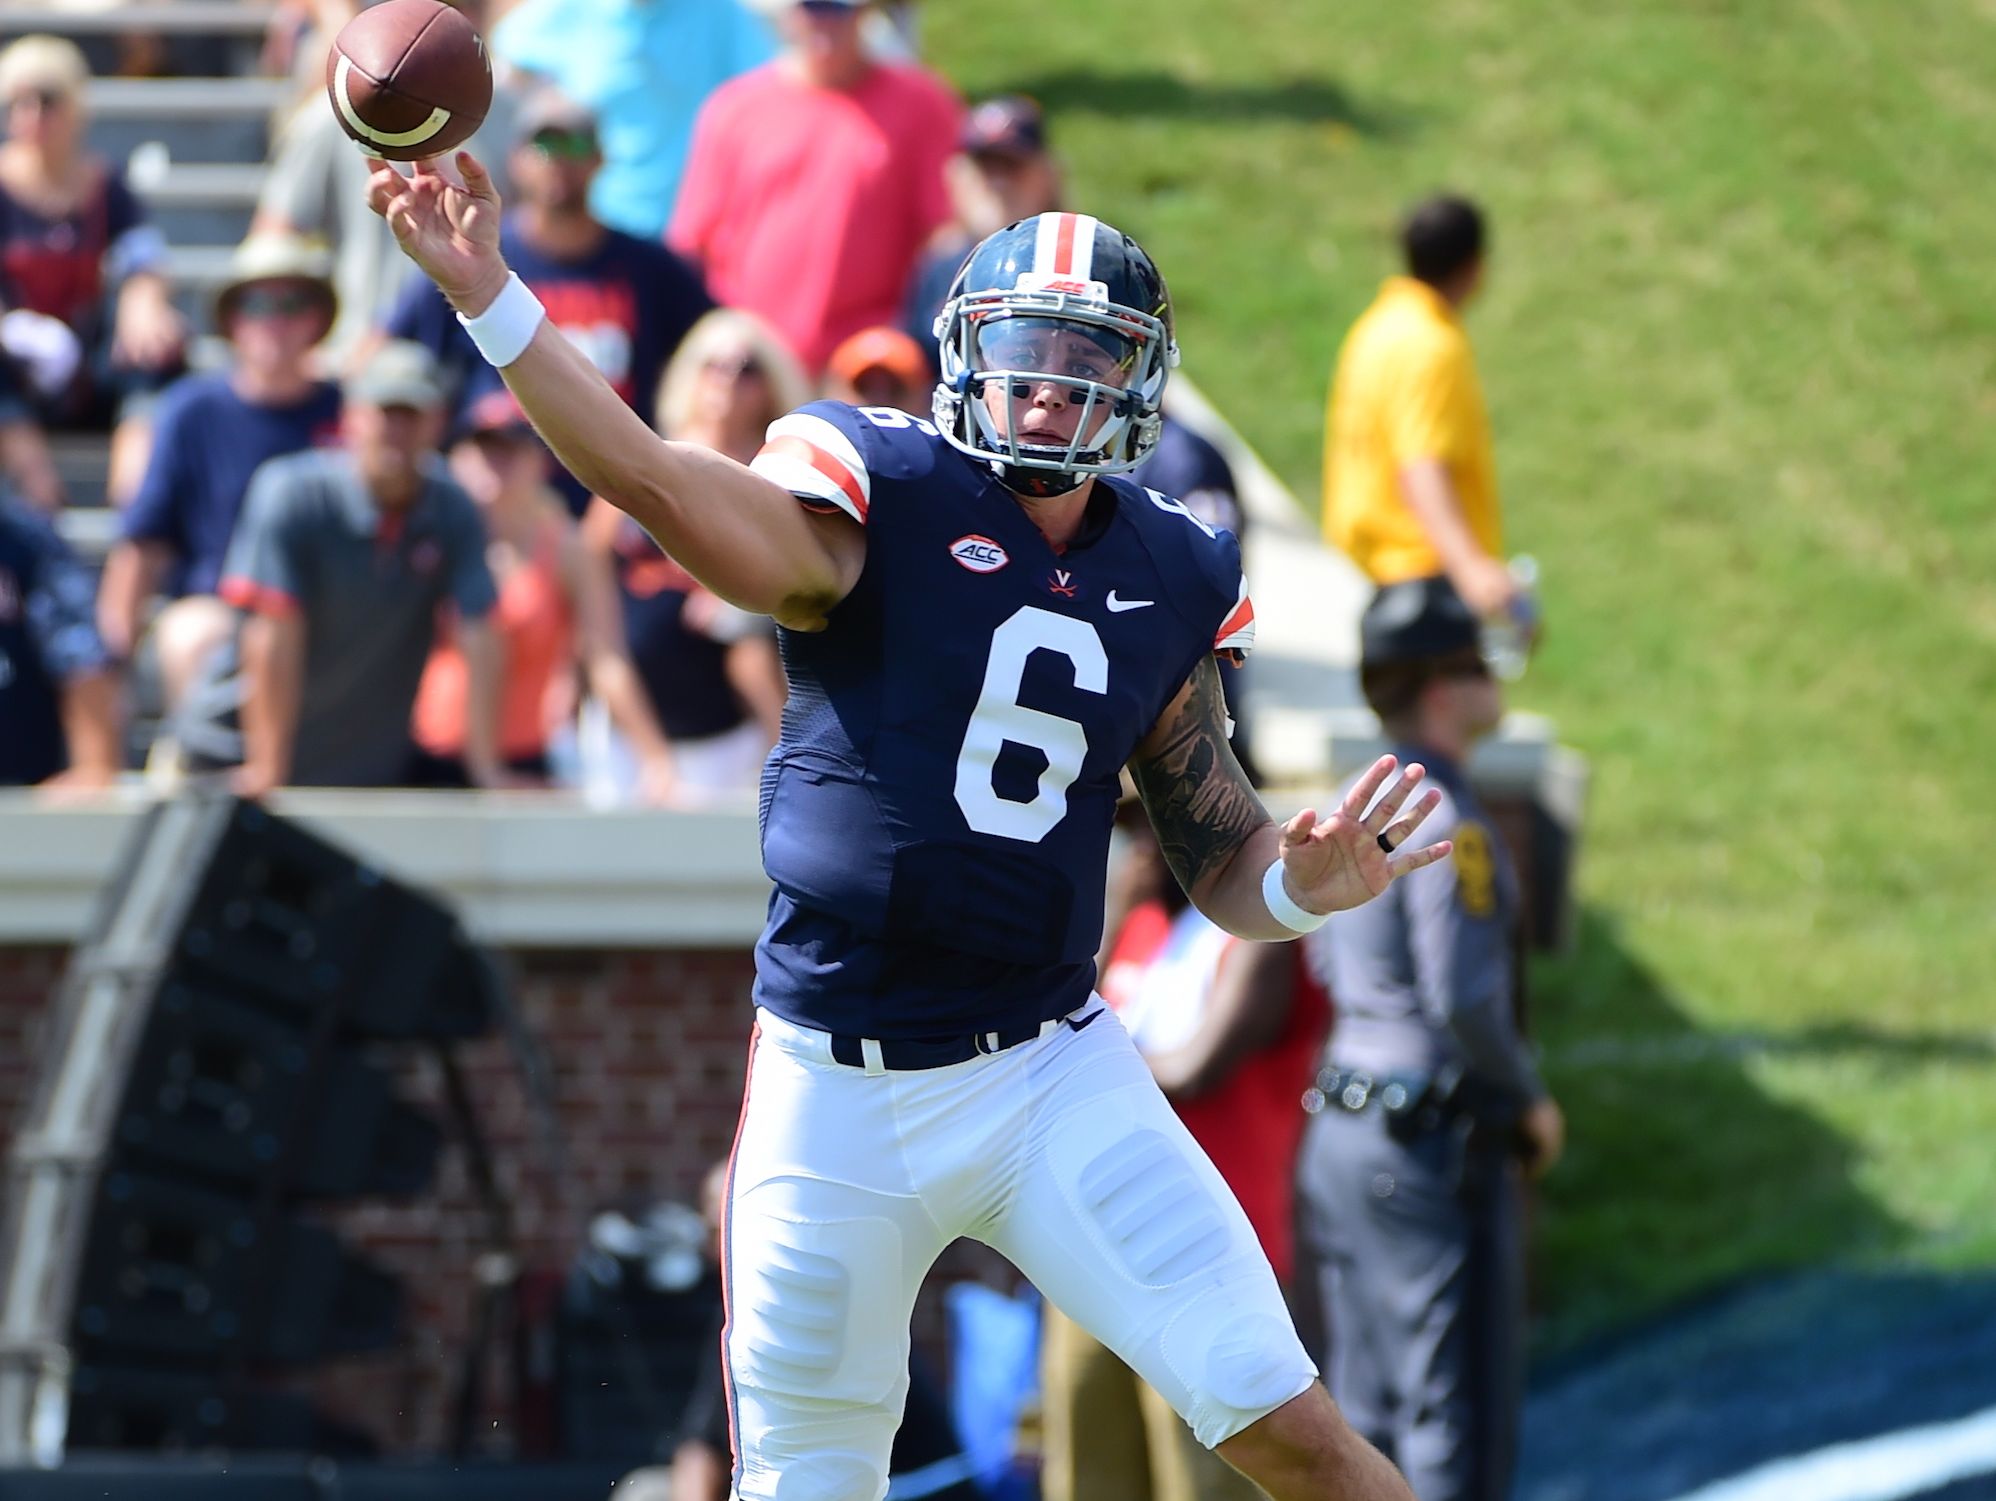 University of Virginia quarterback Kurt Benkert throws a pass during the Cavaliers win over Central Michigan on Saturday. Benkert broke the program's single-game passing record with 421 yards.